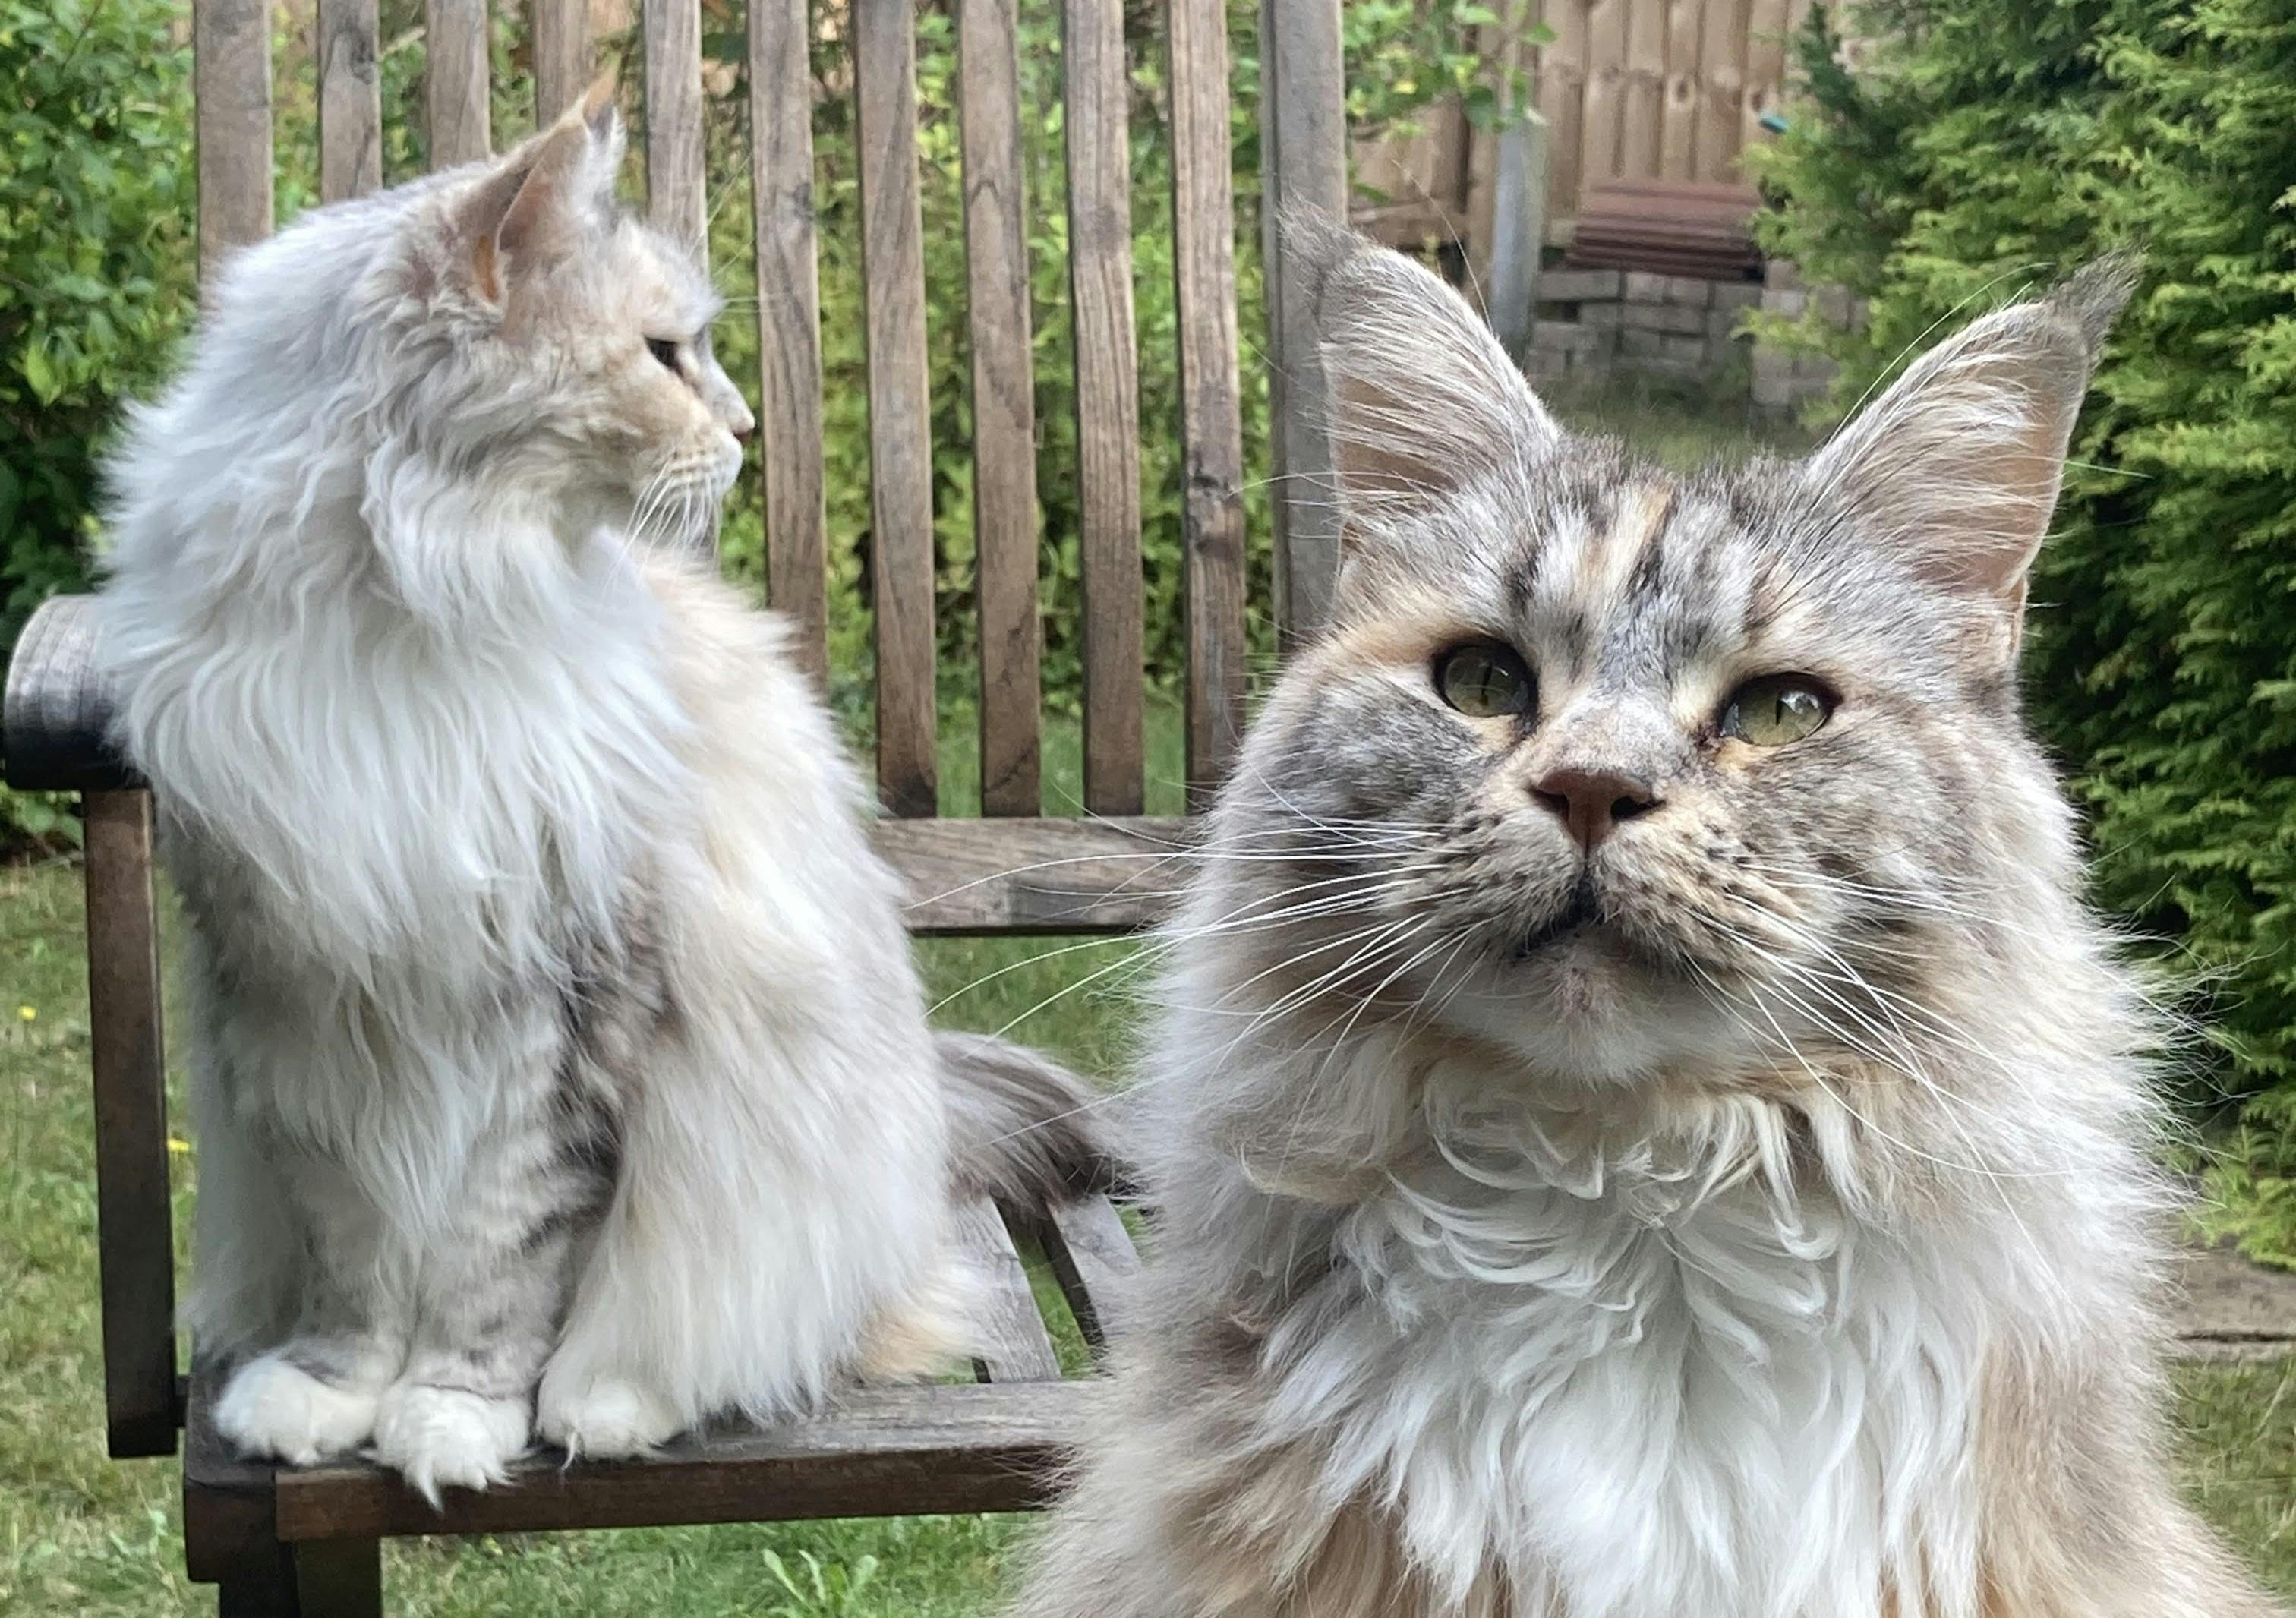 Two mainecoon cats in a garden.